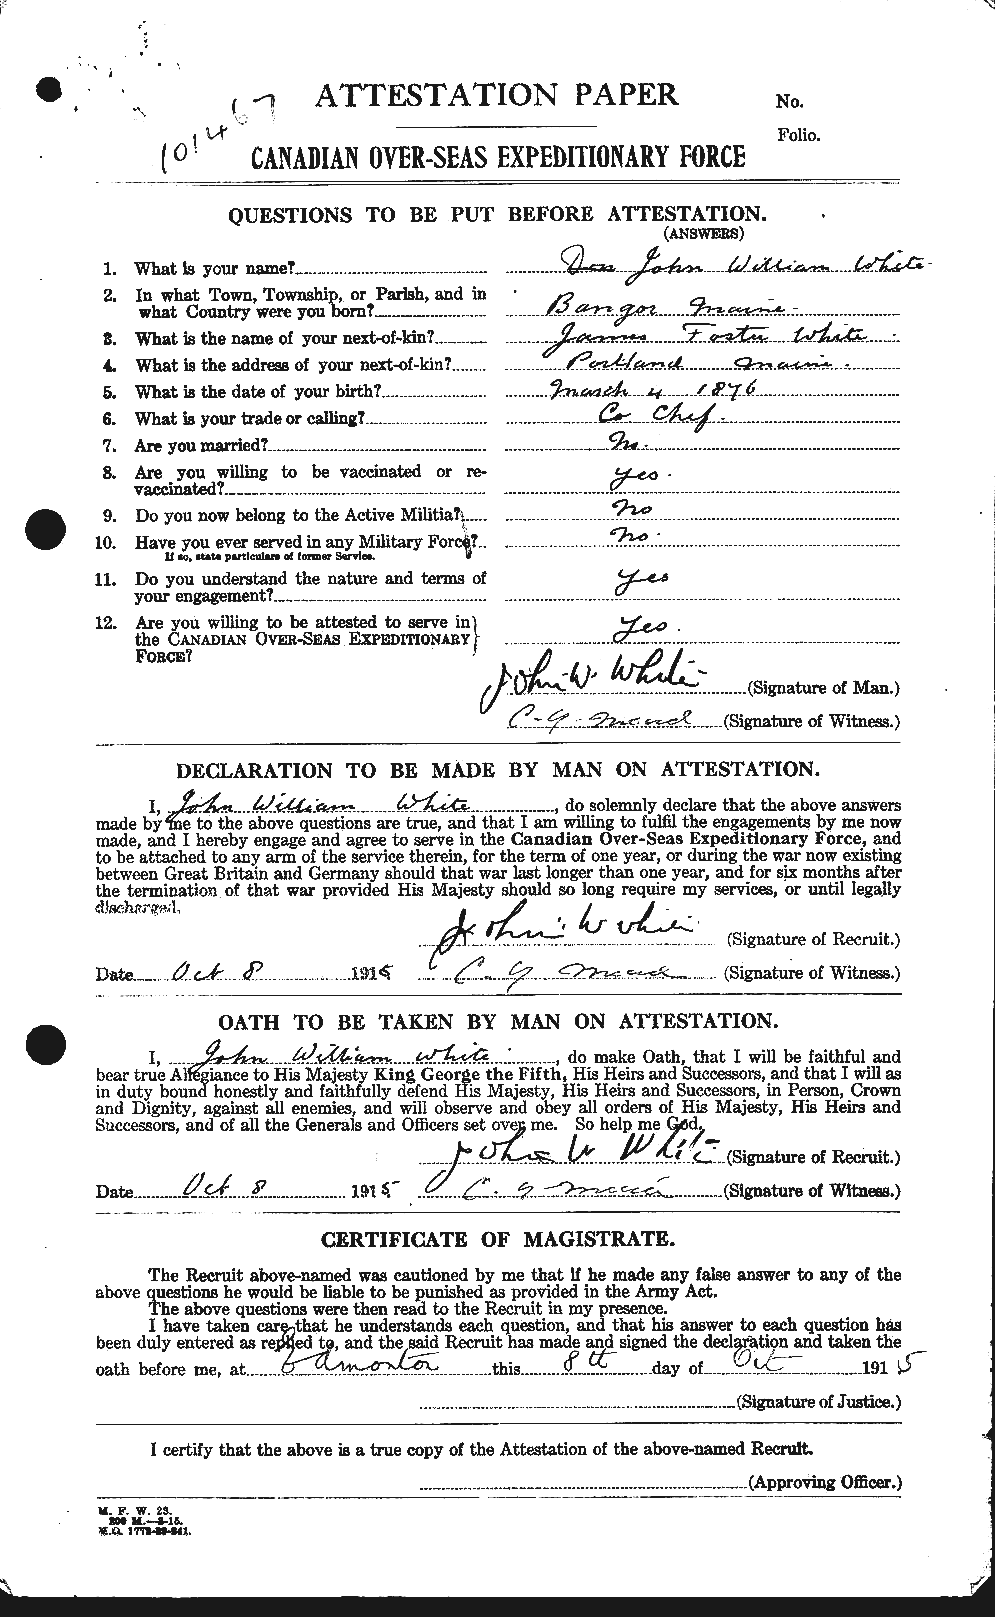 Personnel Records of the First World War - CEF 671617a